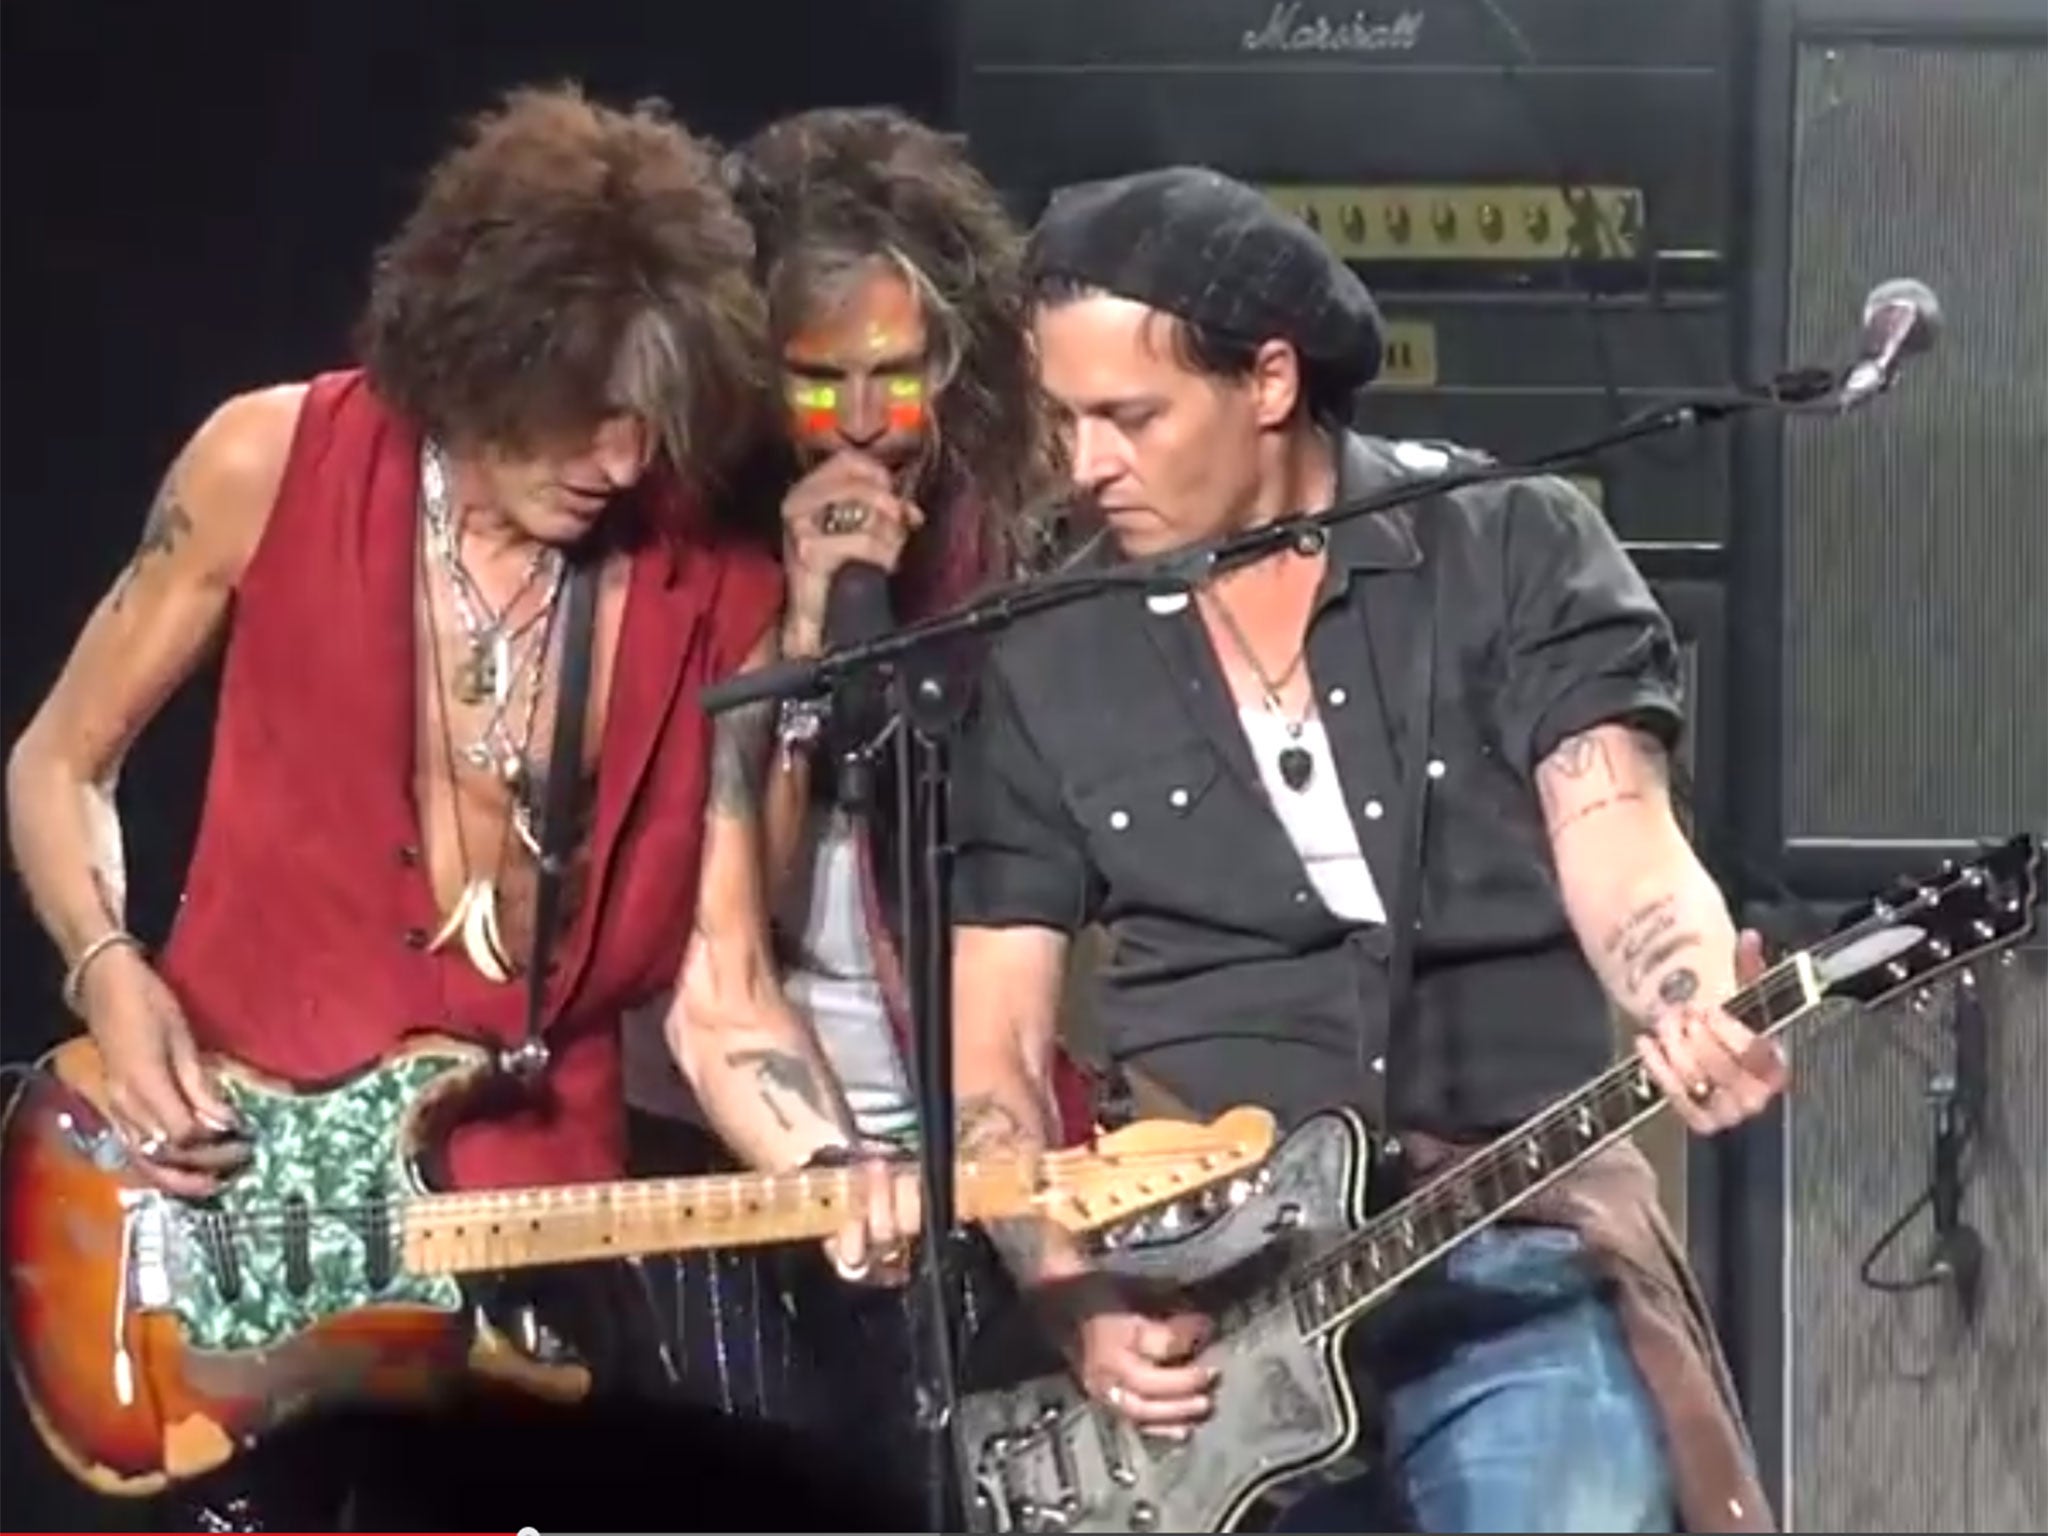 Johnny Depp (R) plays guitar with Aerosmith on stage in Boston